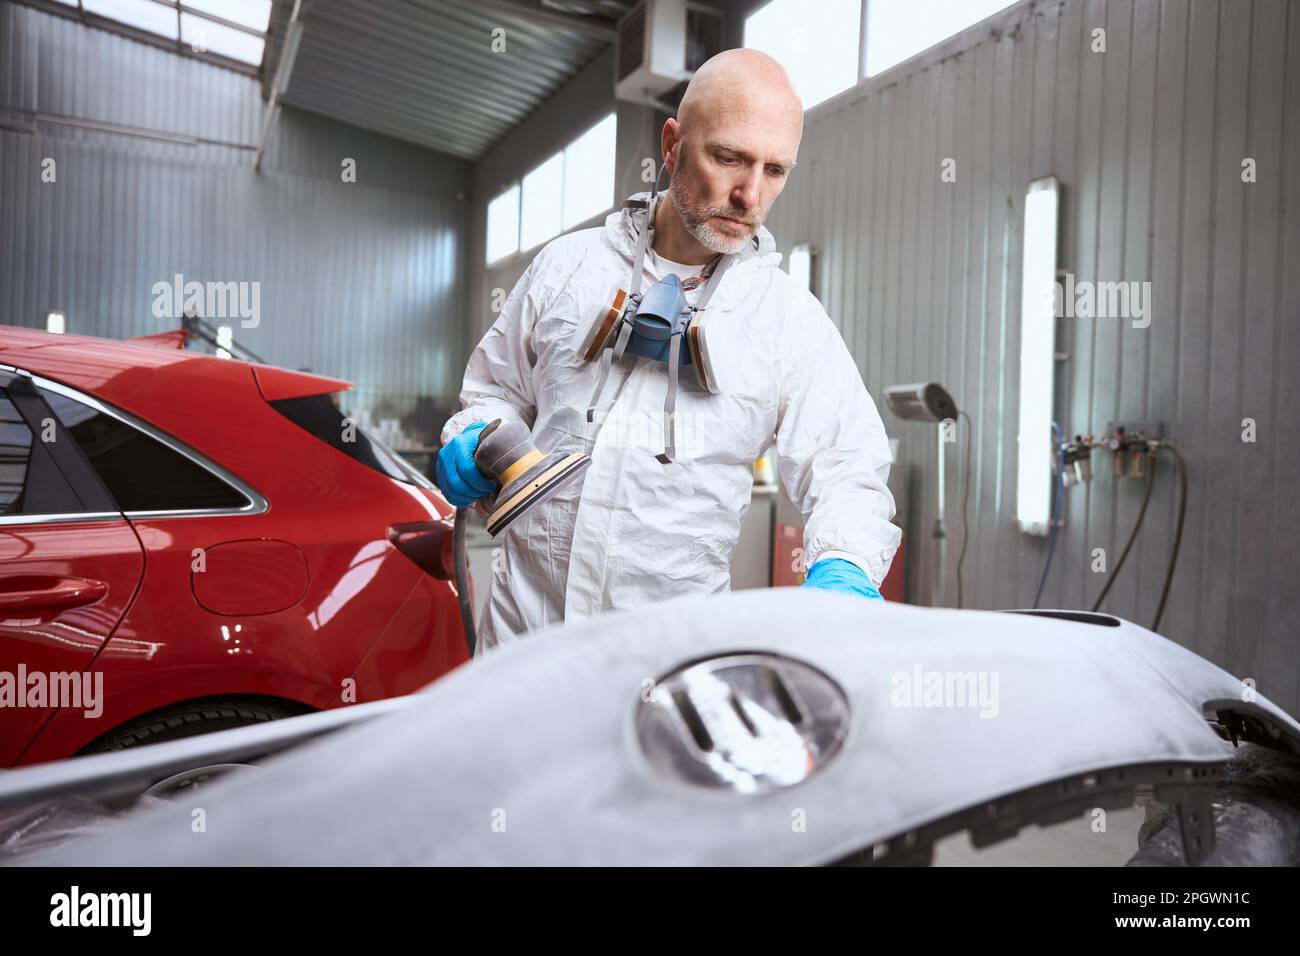 Auto repair shop employee grinds with unpainted car bumper Stock Photo